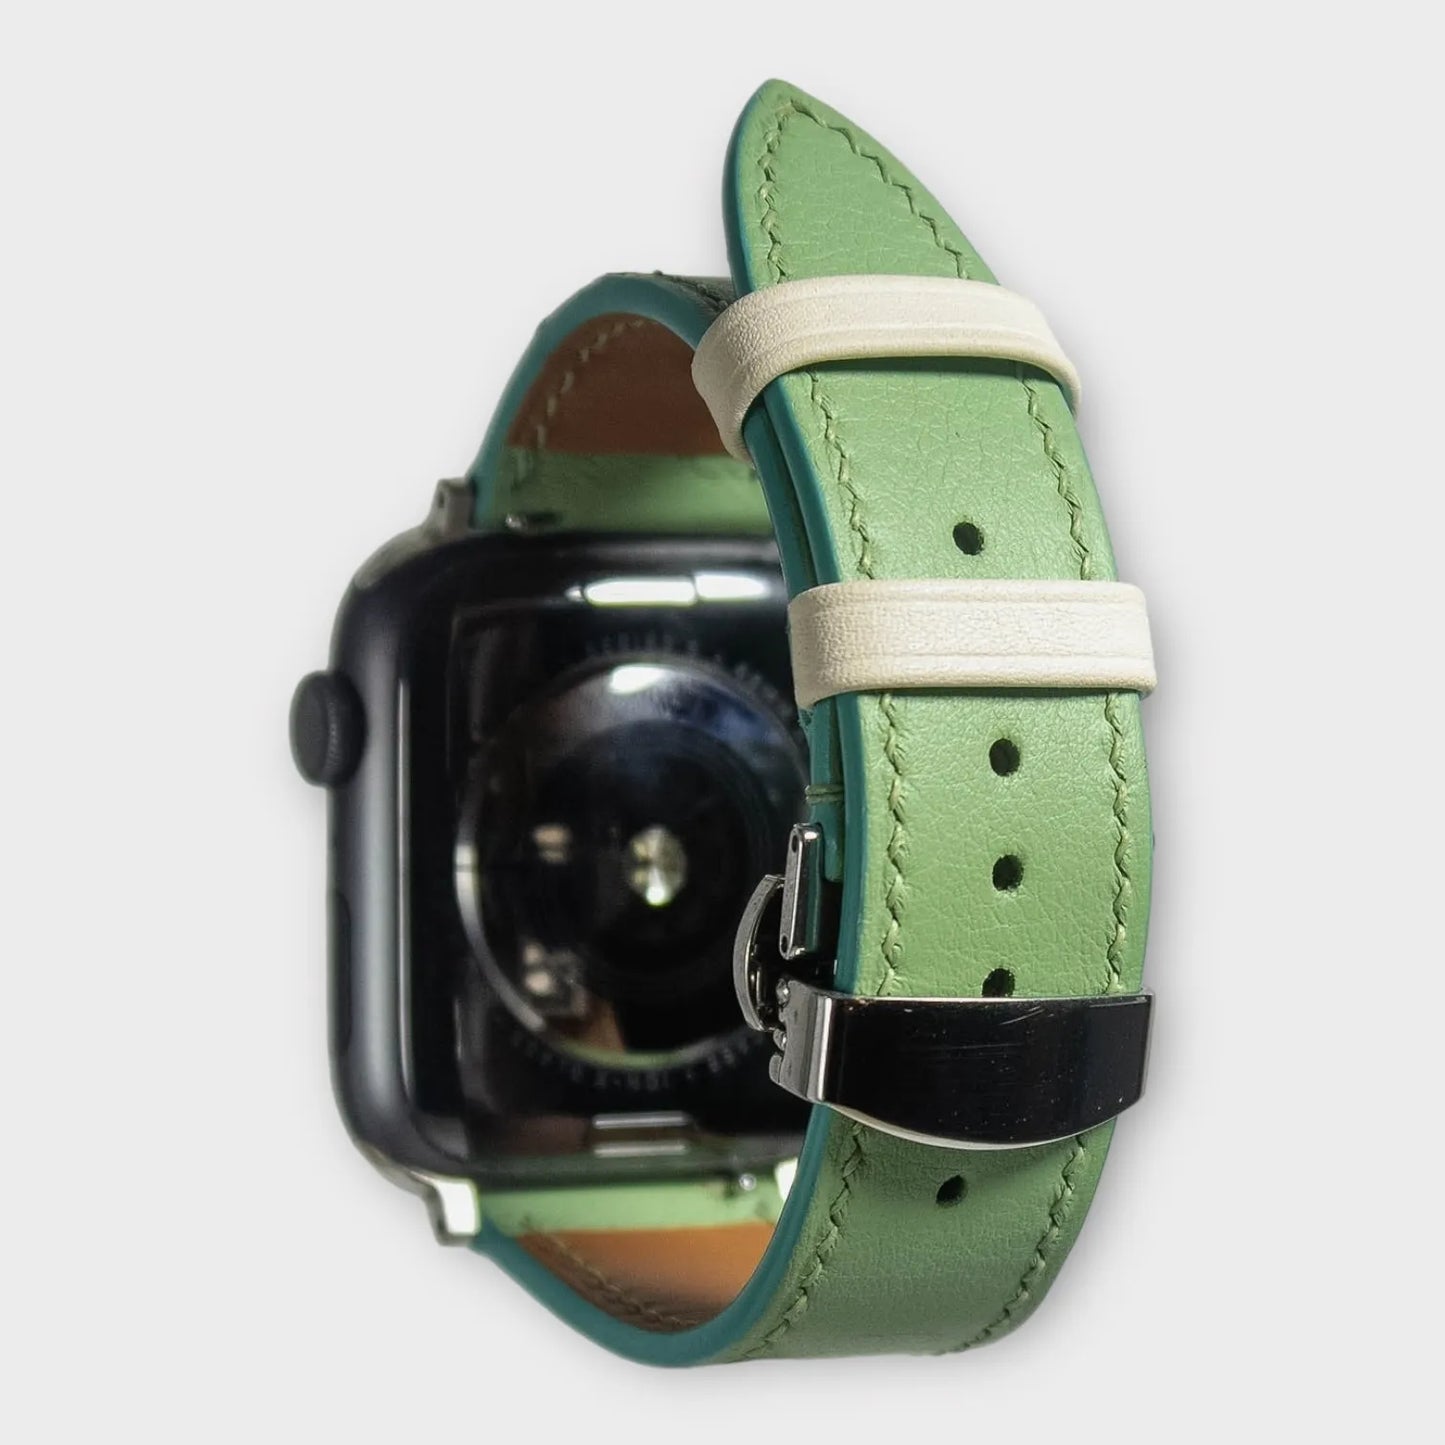 Apple watch bands in fresh mint green Swift leather, adding a pop of color to your style.